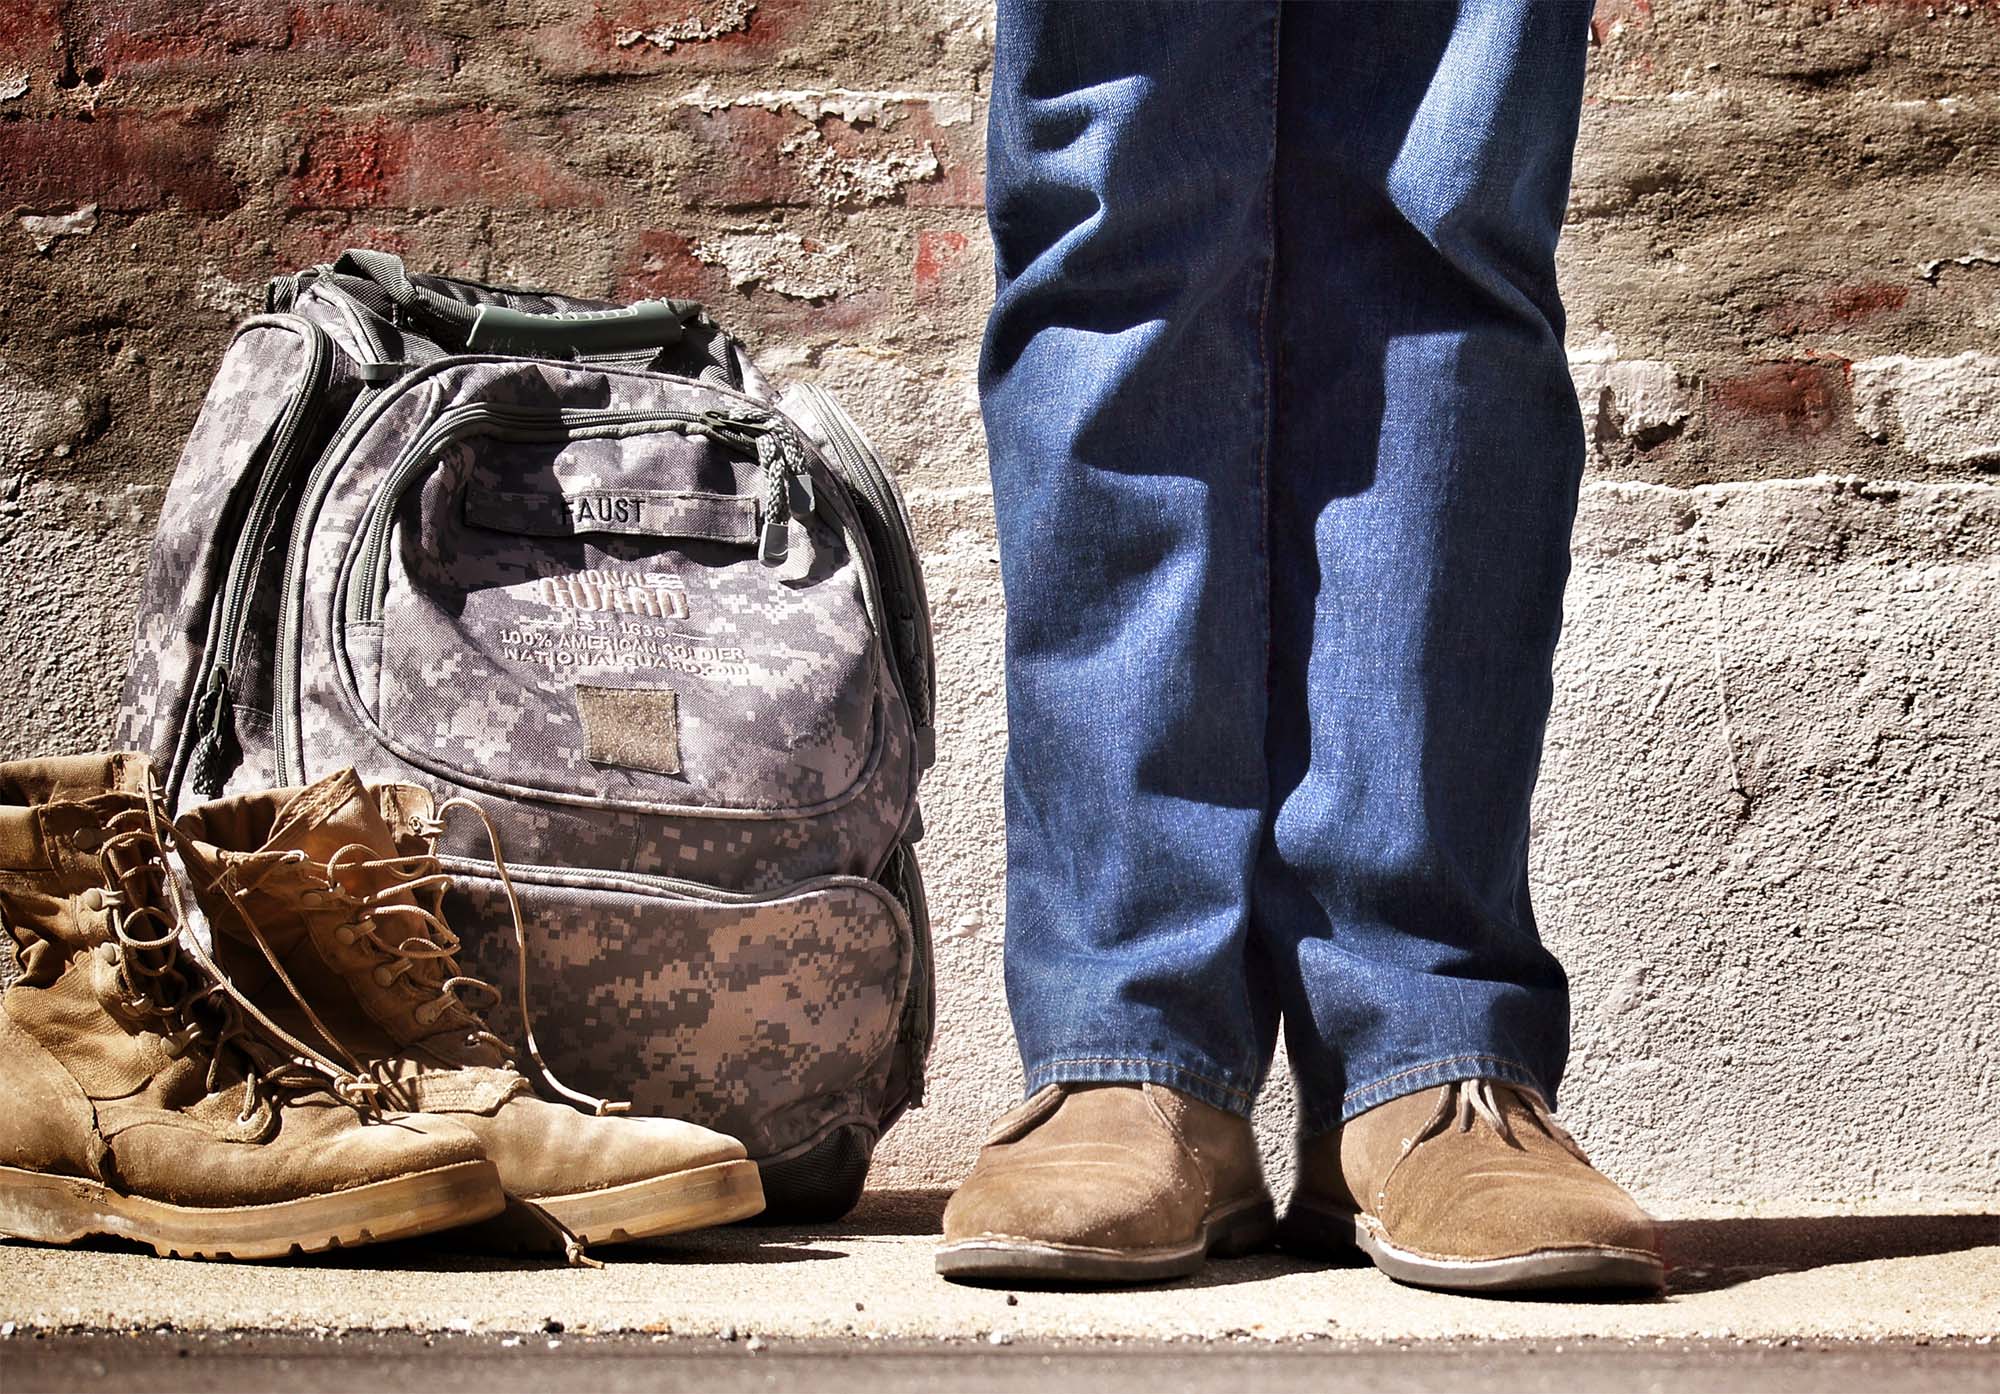 A person in normal attire with a military backpack and boots to the side meant to indicate the person is transitioning for military to civilian life.